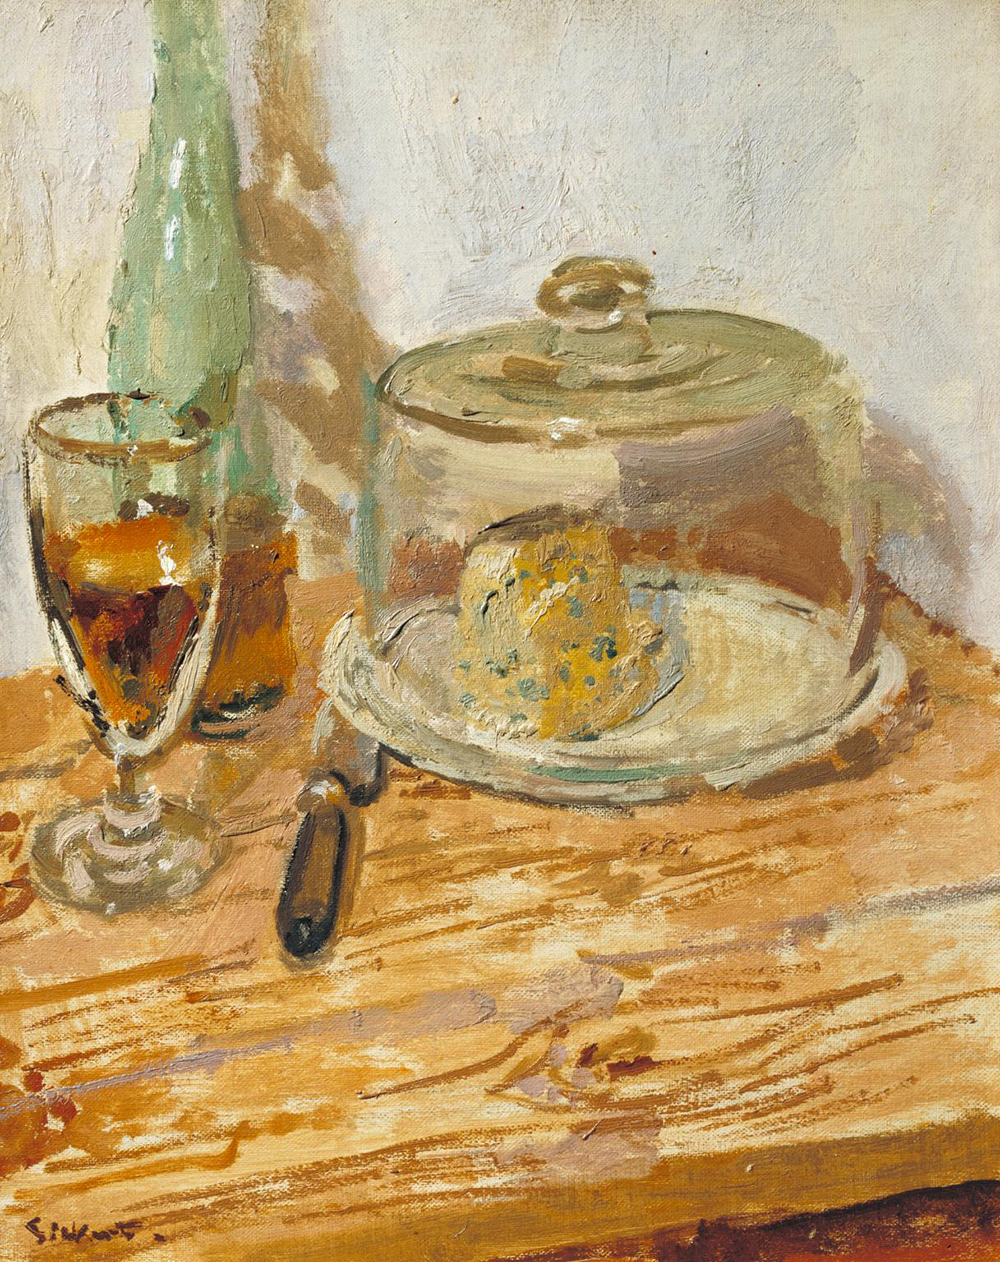 A painting of a wooden table with a slab of Roquefort cheese covered by a glass cloche, a glass and bottle of wine, and a knife on top.